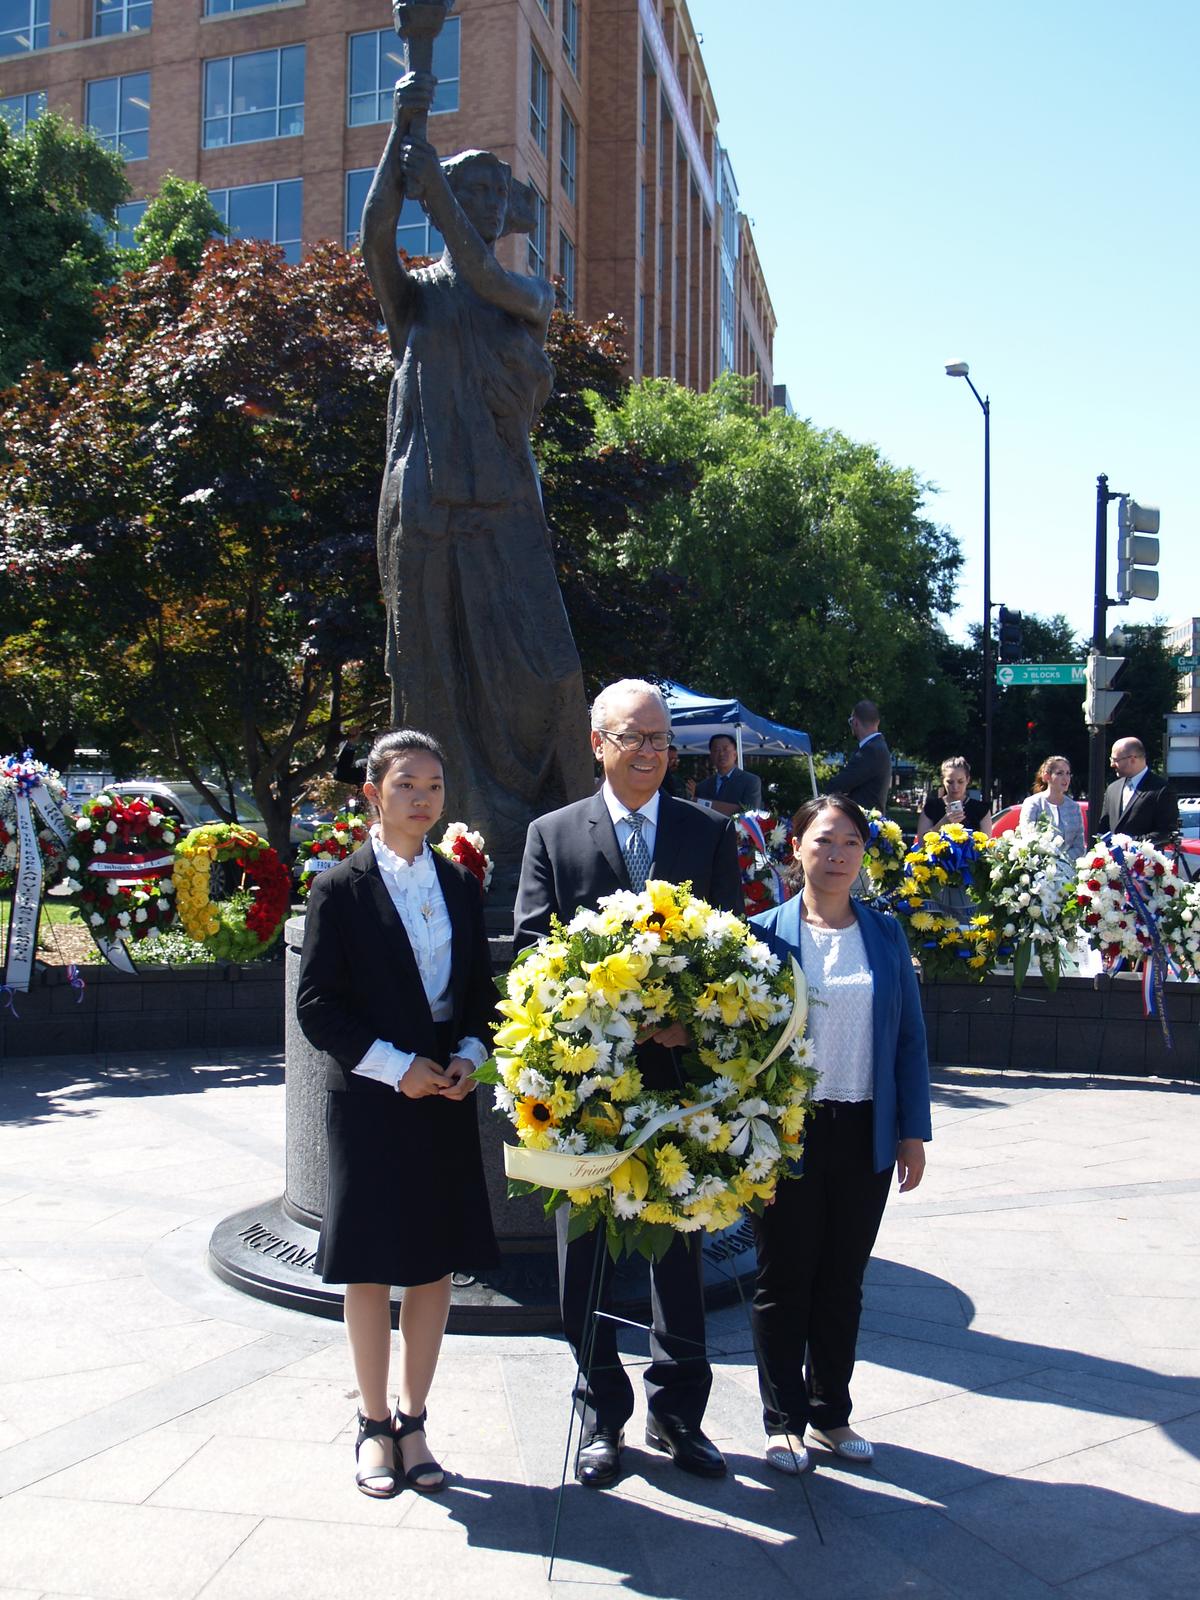 Xu Xinyang (L), Alan Adler, and Chi Lihua present a wreath remembering the victims of communism at the tenth annual Truman-Reagan Medal of Freedom and Roll Call of Nations Ceremony, on June 9 in Washington, D.C. Adler is the executive director of Friends of Falun Gong, Xu and Li are practitioners of Falun Gong who suffered persecution in China for their beliefs. (Kitty Wang, NTDTV)